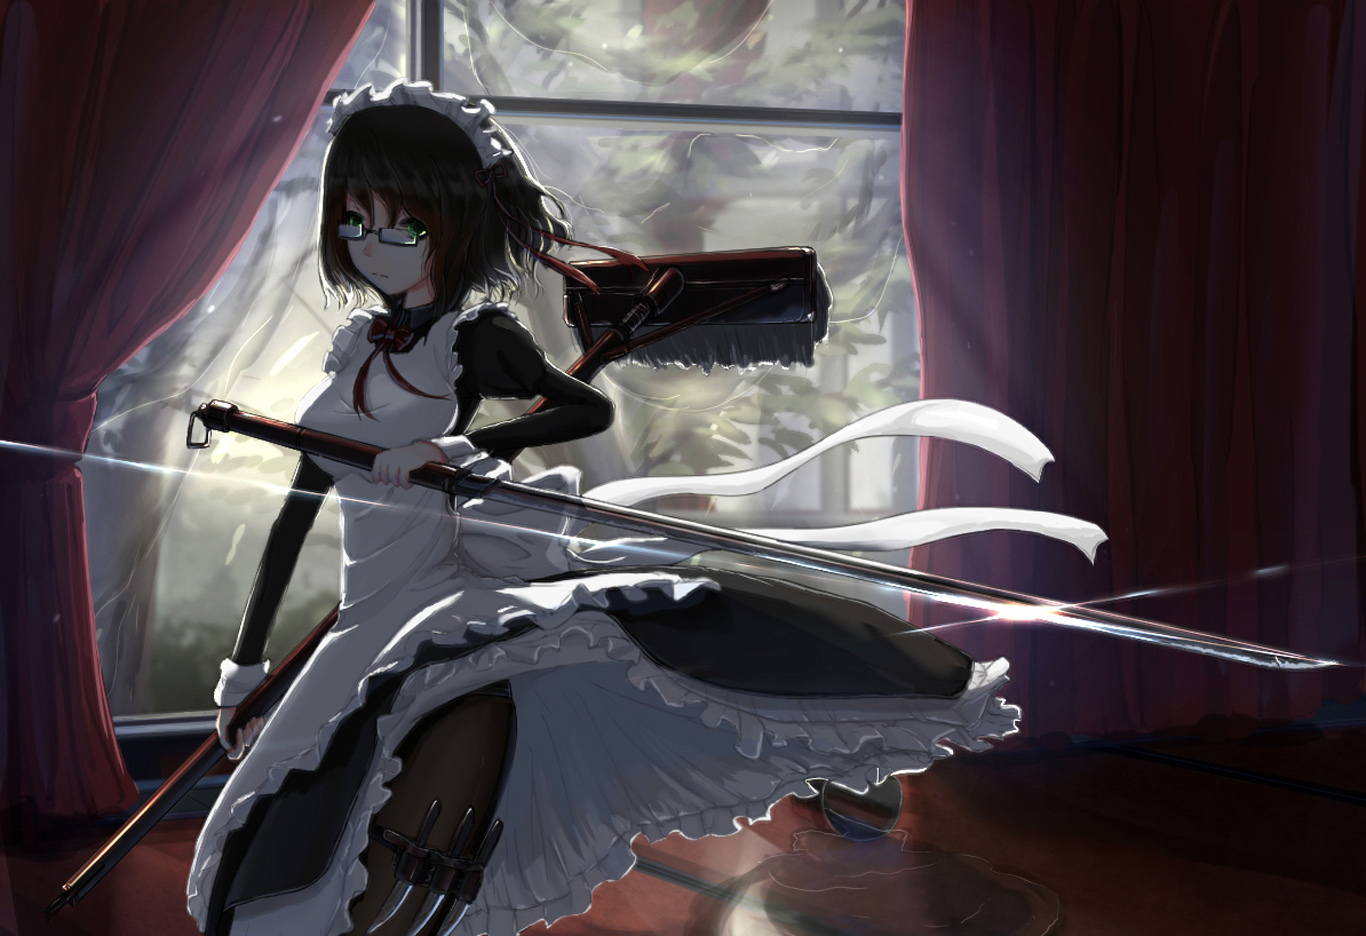 ... sword weapon Anime HD Wallpaper Background Image Photo Picture d51